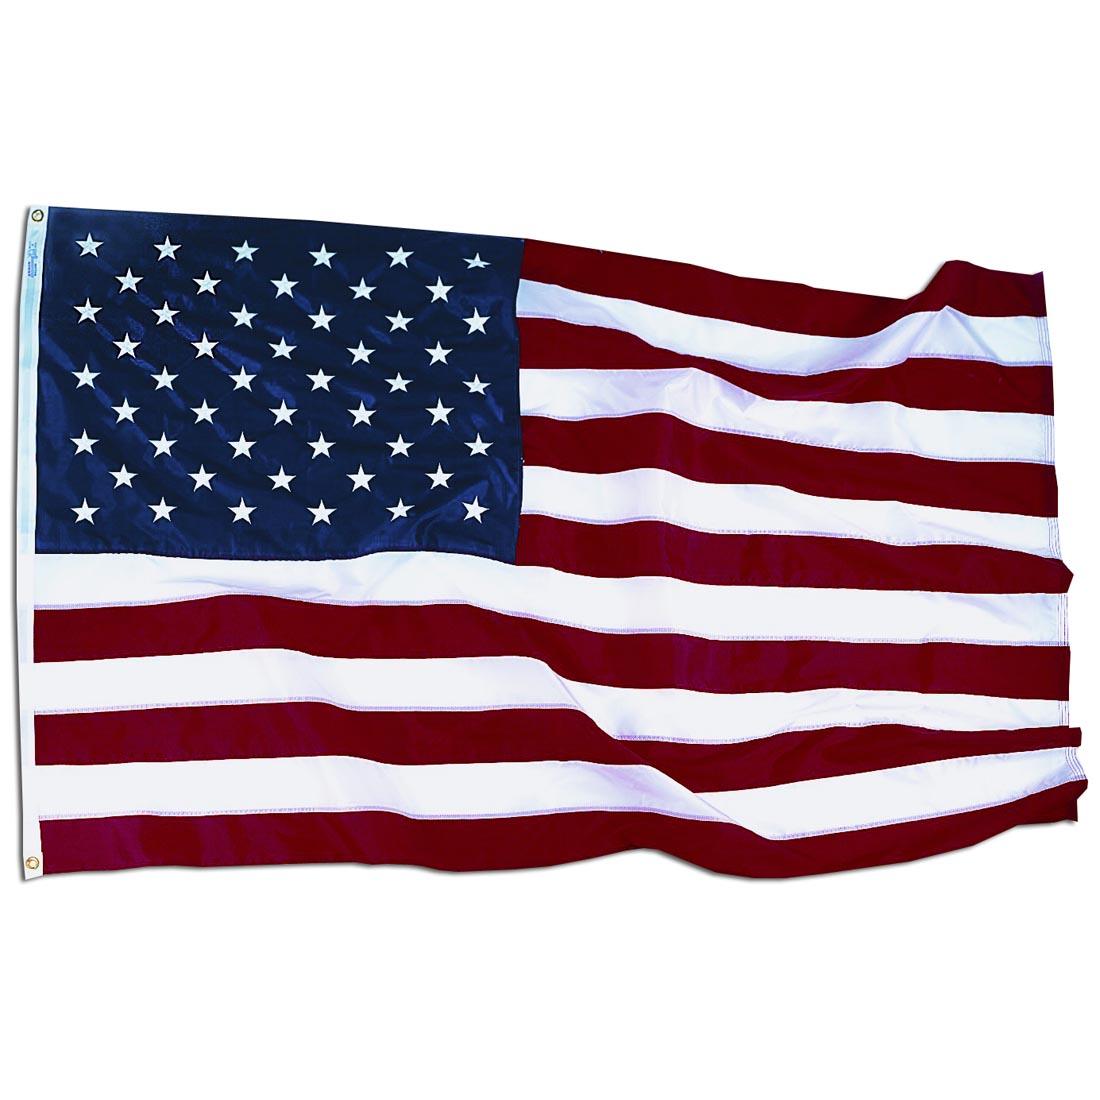 United States of America Flag with grommets